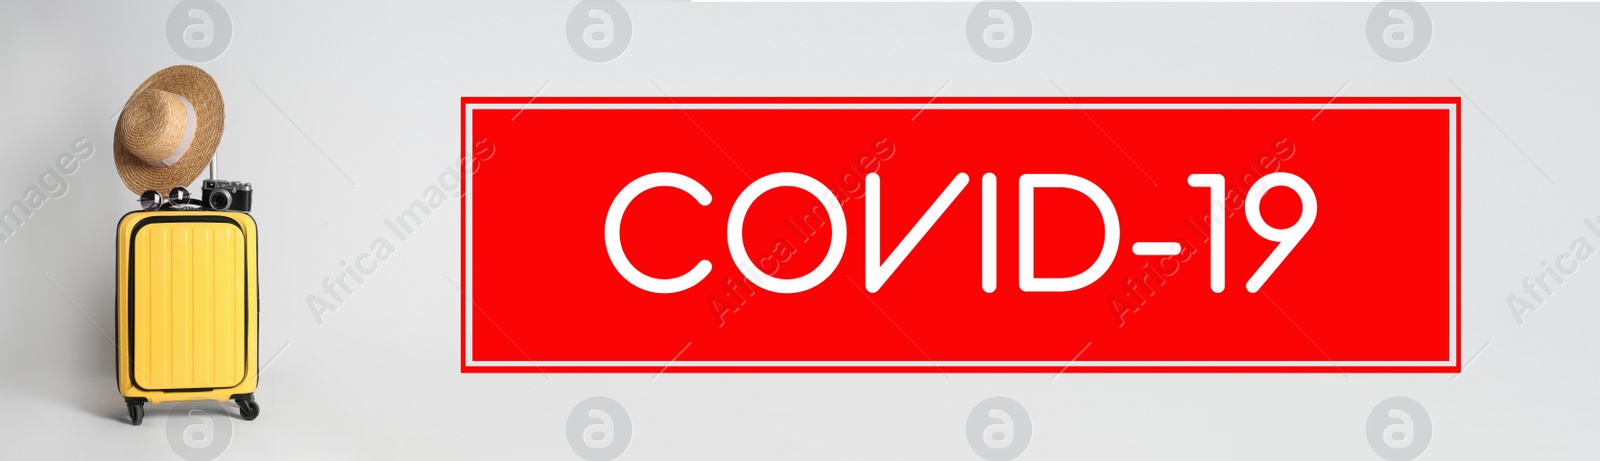 Image of Coronavirus pandemic, lockdown measures. Travel suitcase and text COVID-19 on light background, banner design